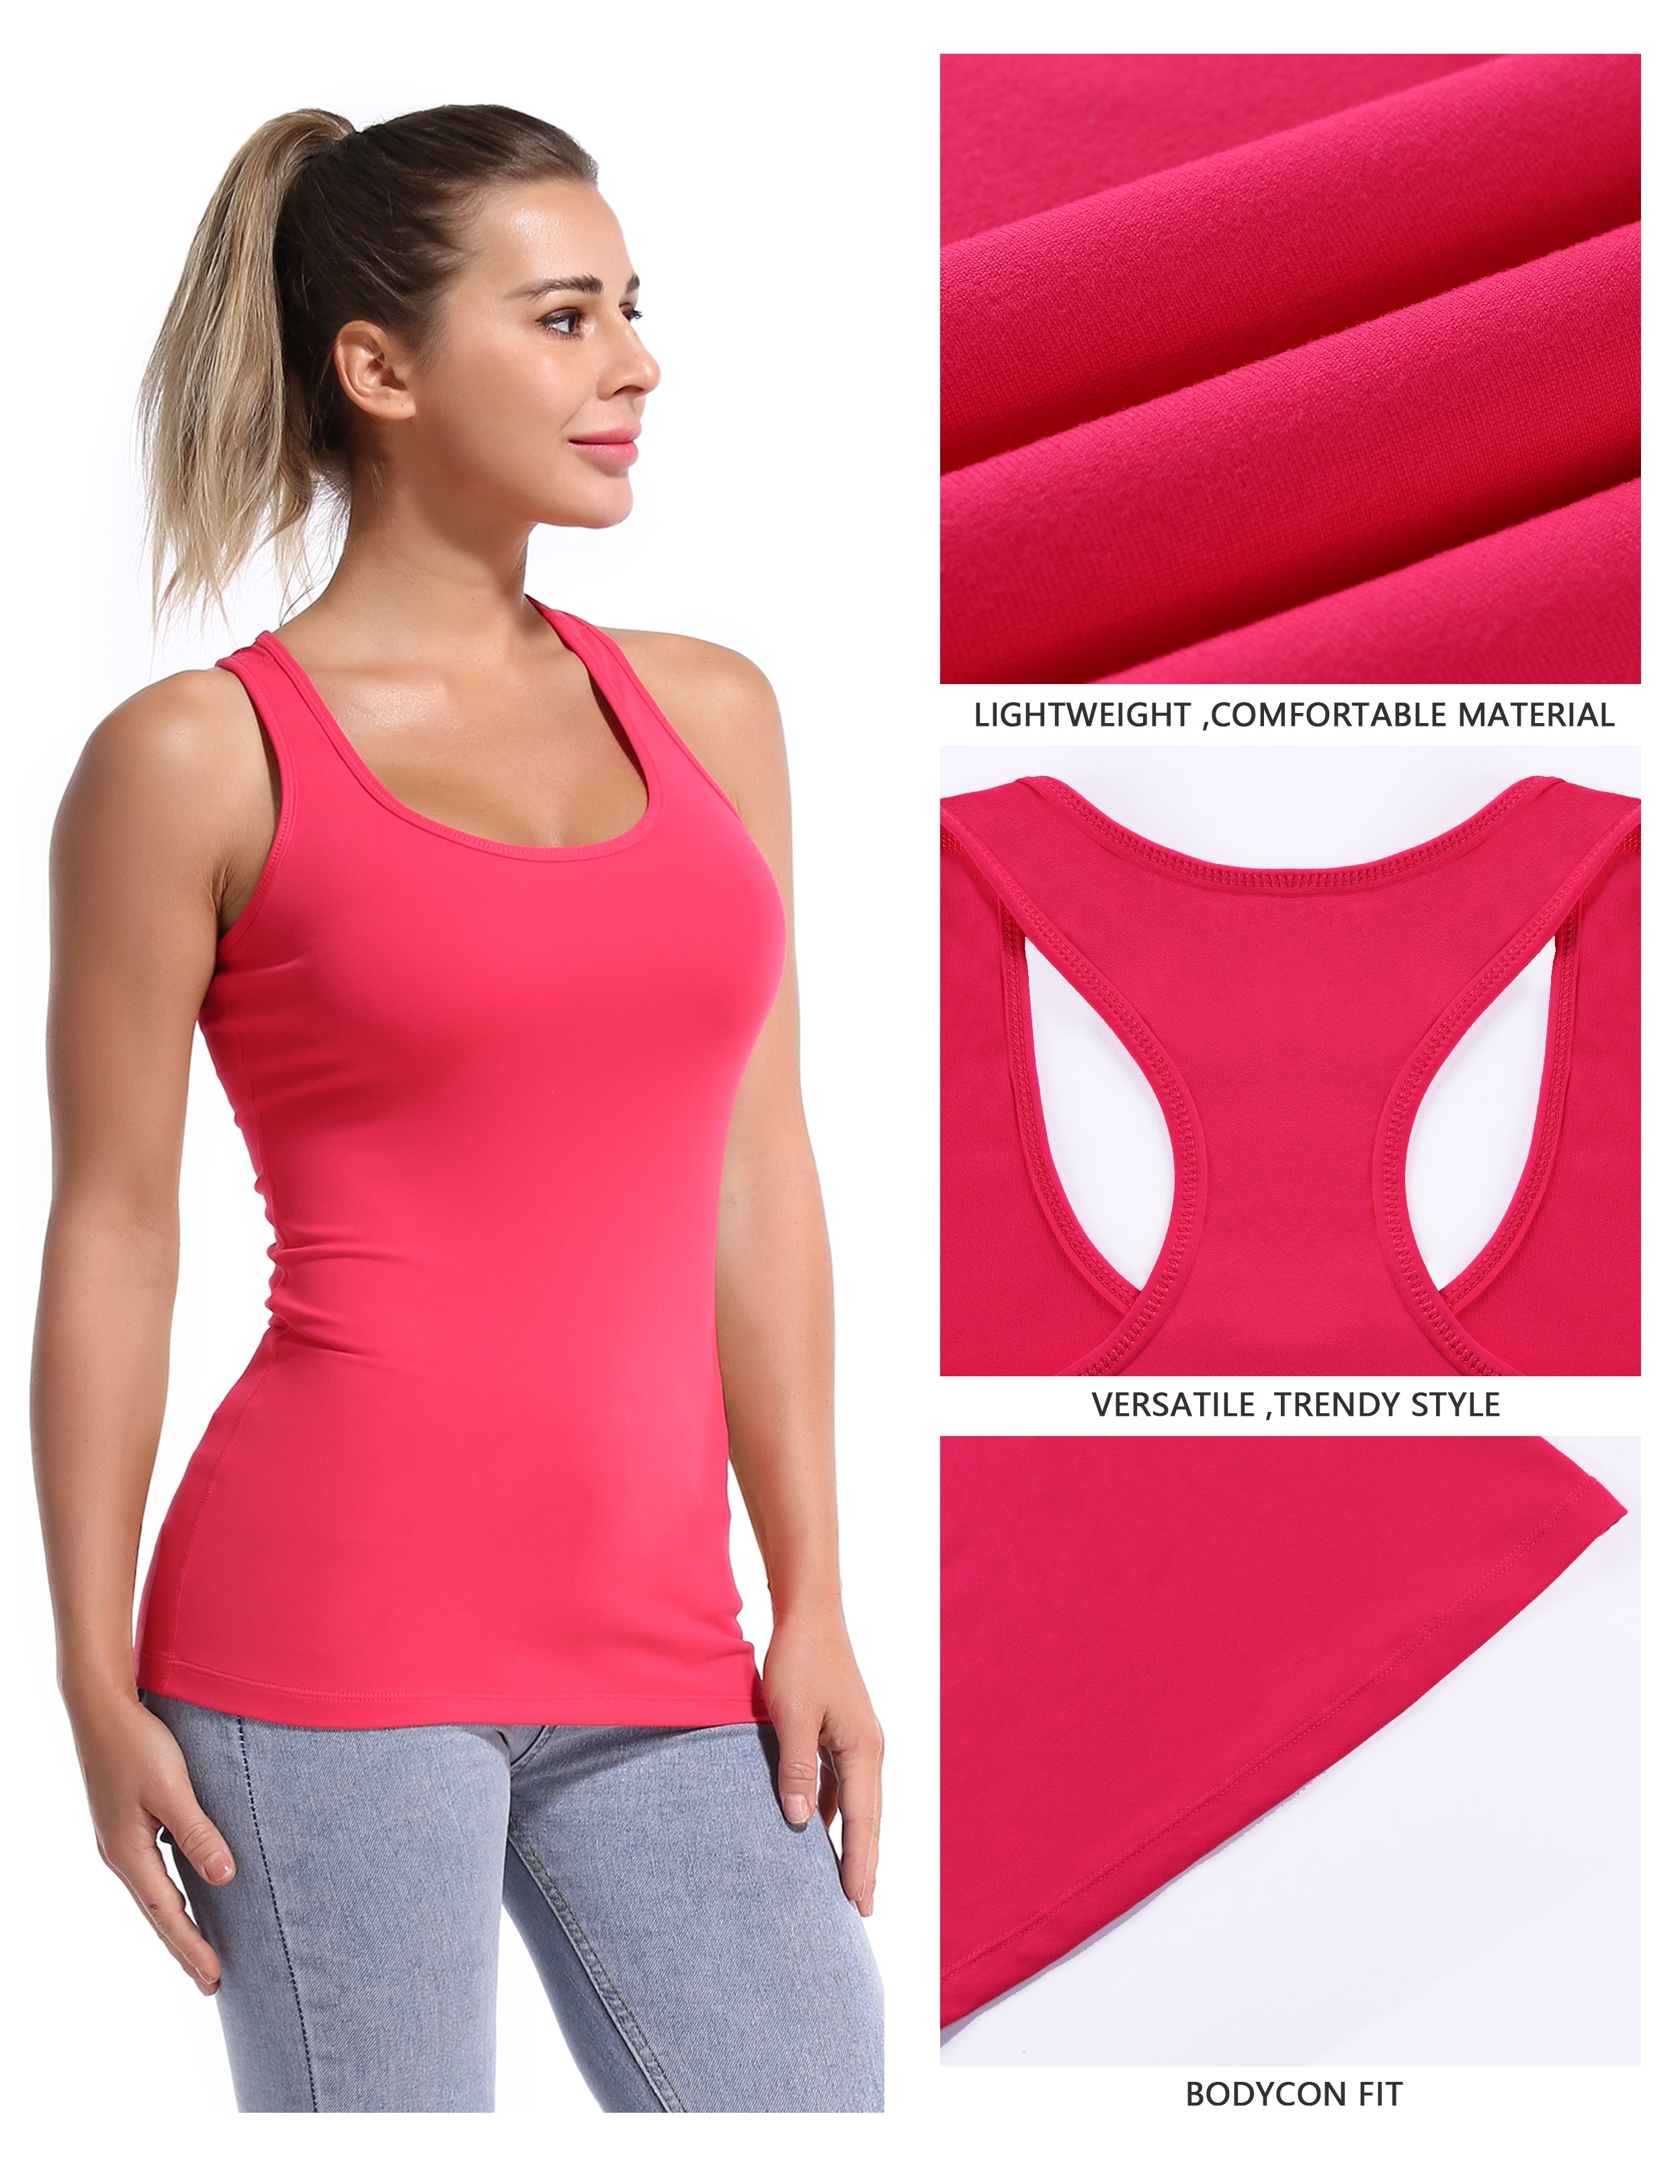 Racerback Athletic Tank Tops red 92%Nylon/8%Spandex(Cotton Soft) Designed for Tall Size Tight Fit So buttery soft, it feels weightless Sweat-wicking Four-way stretch Breathable Contours your body Sits below the waistband for moderate, everyday coverage